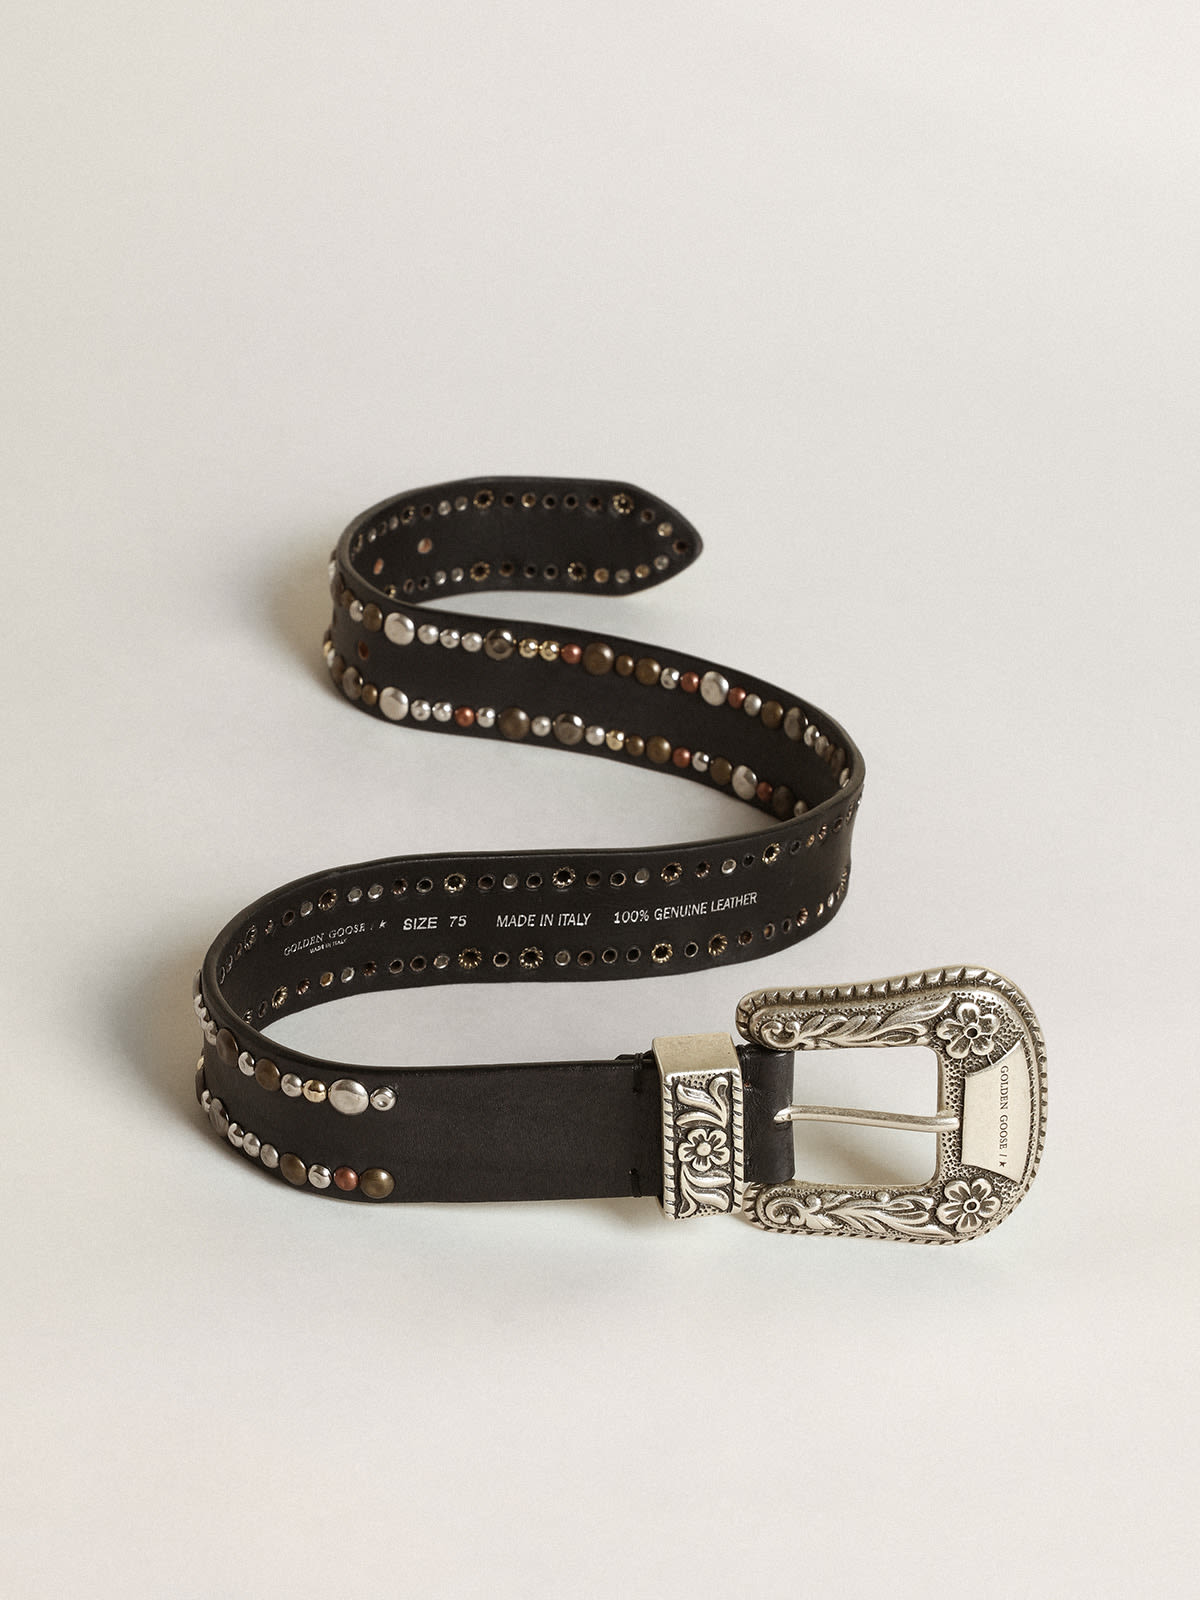 Golden Goose - Lace belt in black leather with colored studs in 